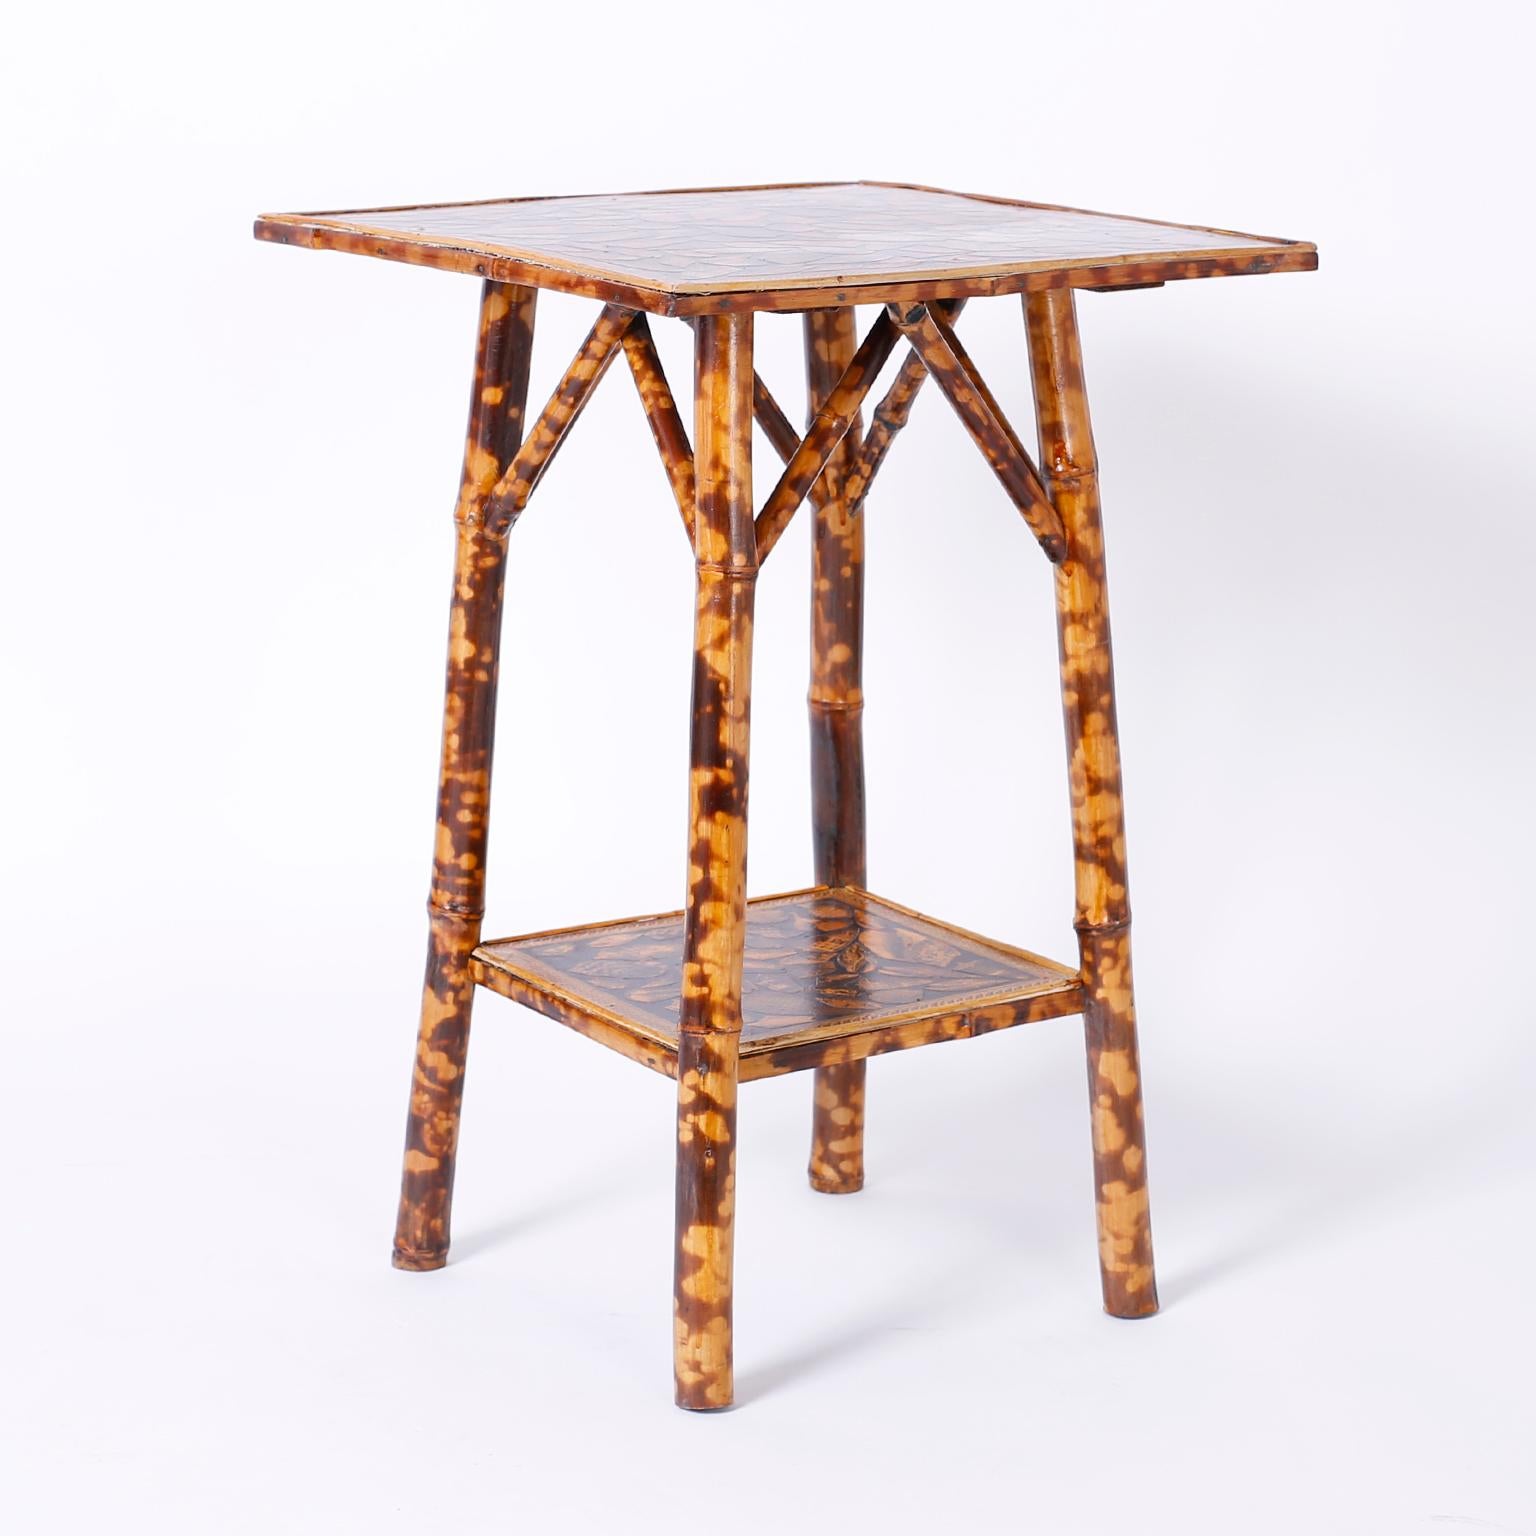 English Pair of Bamboo Tables with Seashell Decoupage Tops